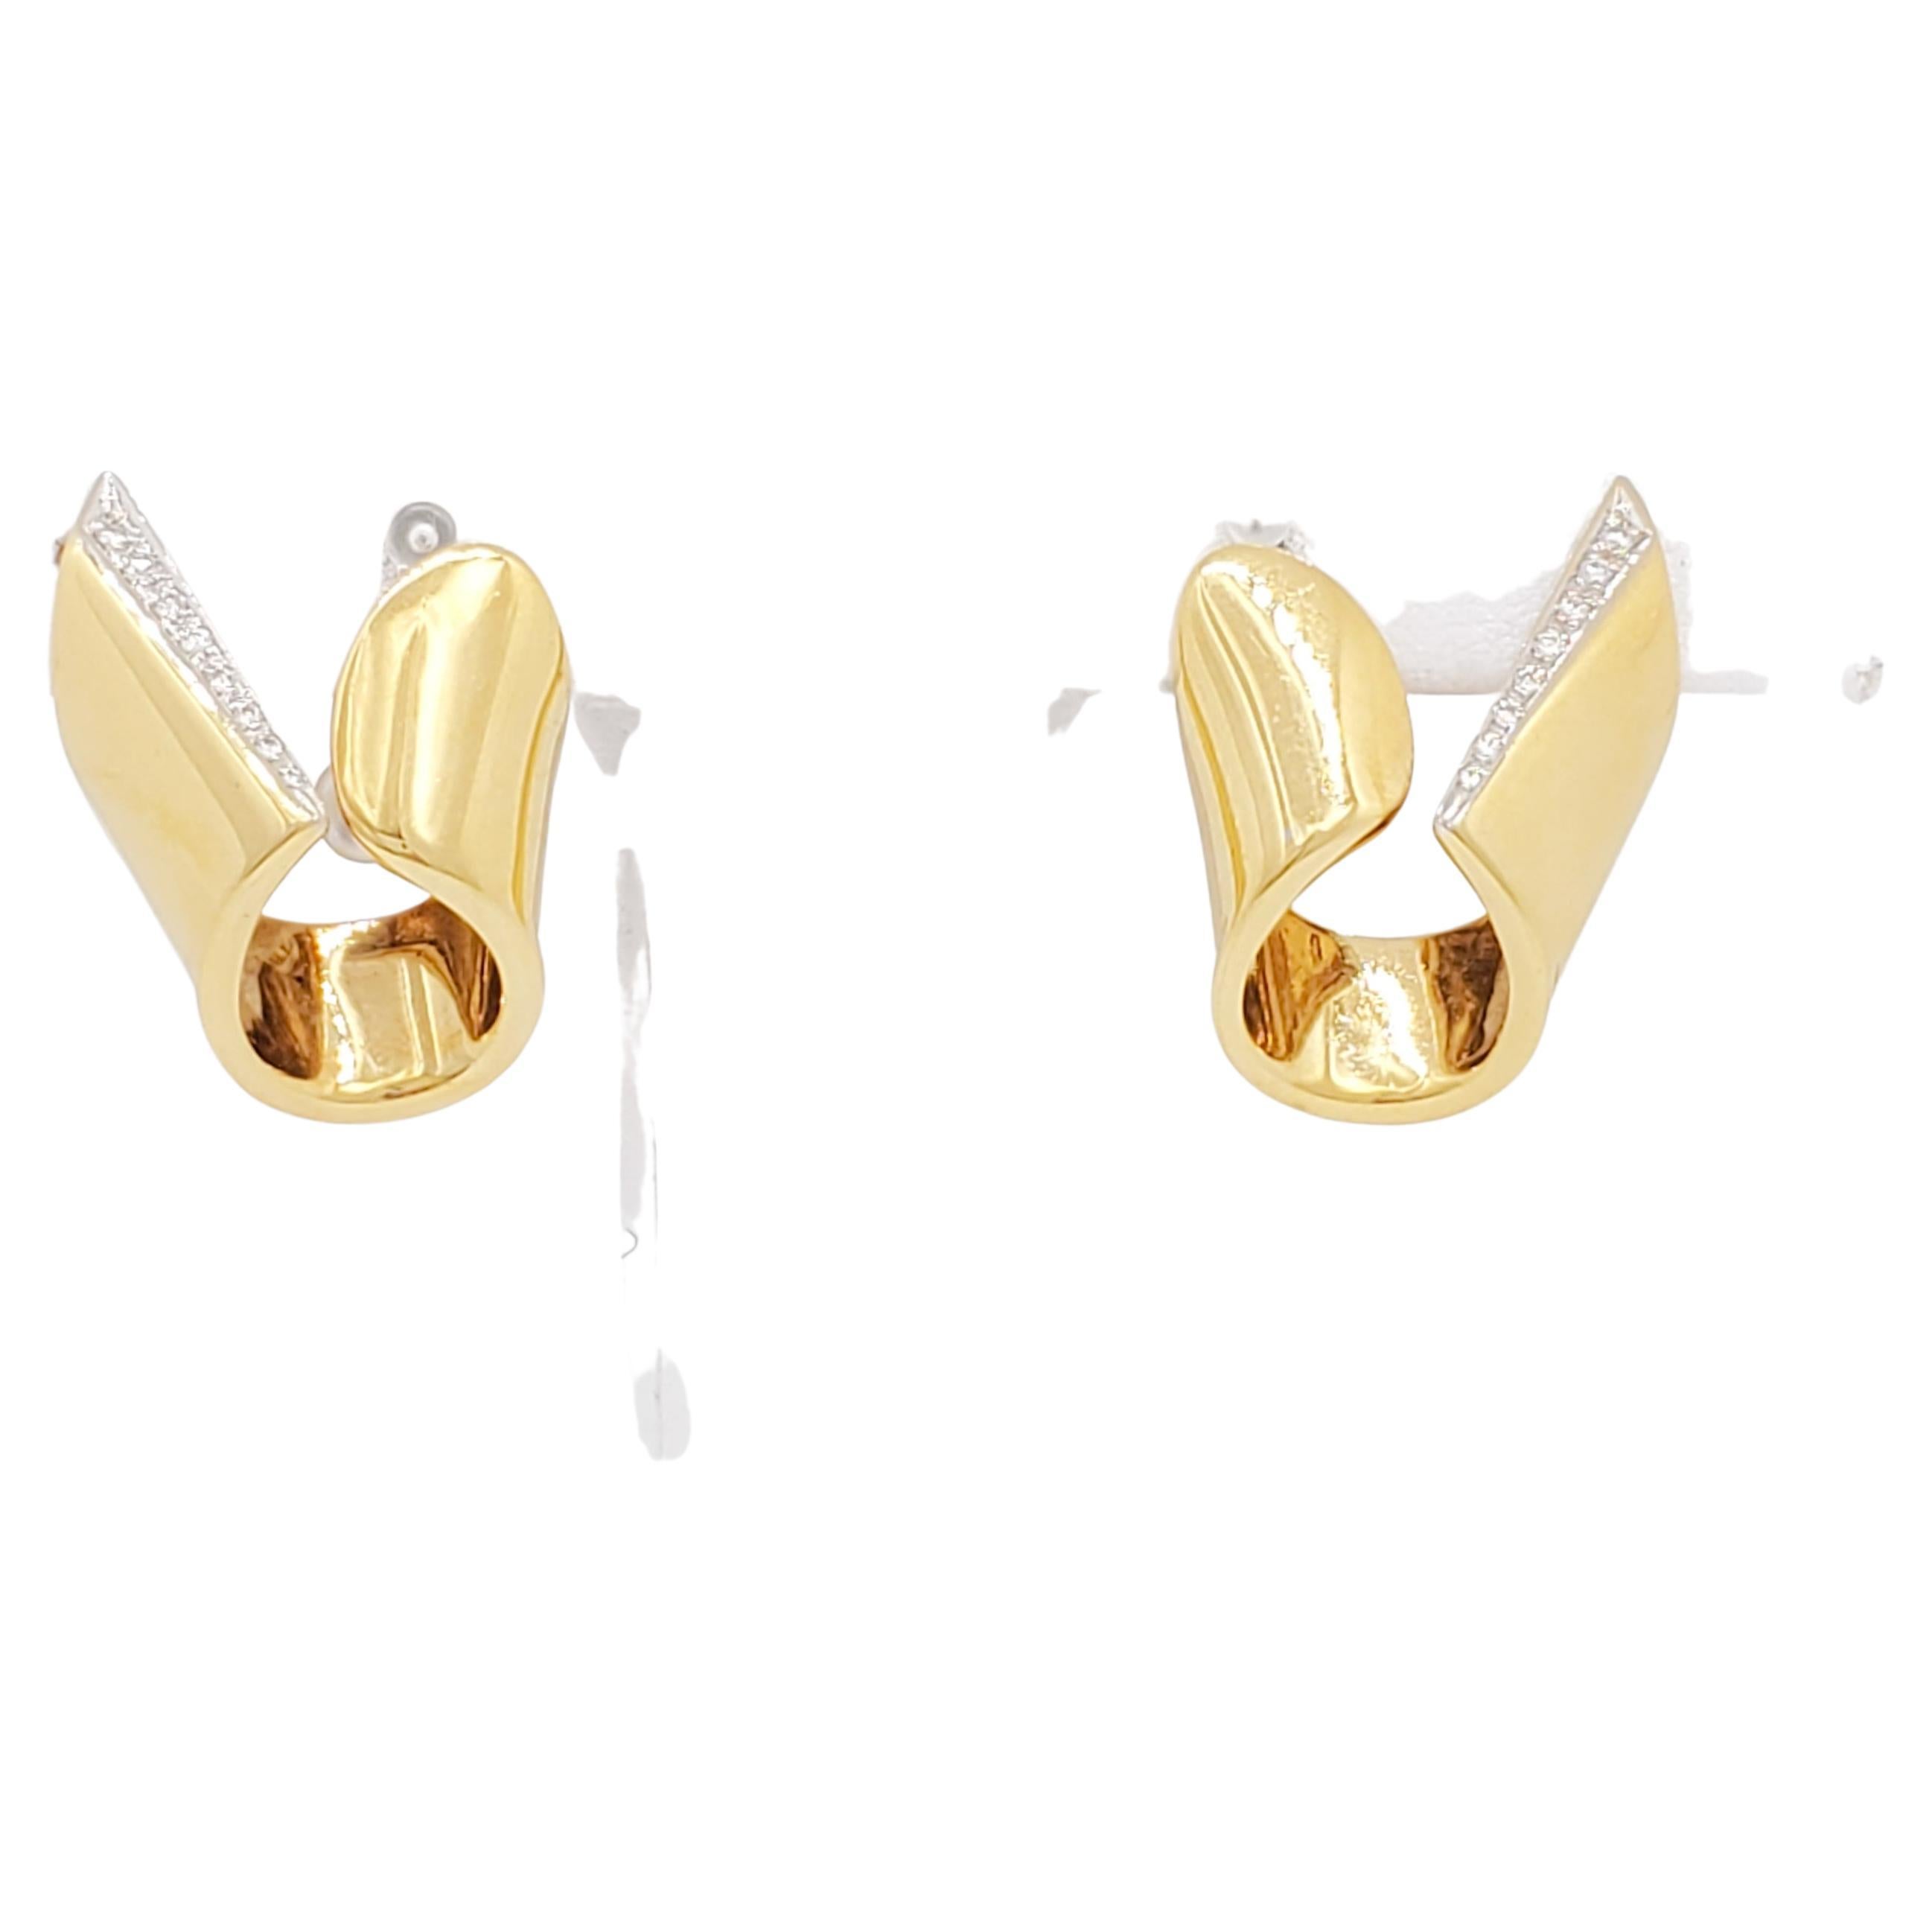 Beautiful and eclectic earrings with 0.05 ct. white diamond rounds.  Handmade in 18k yellow gold.